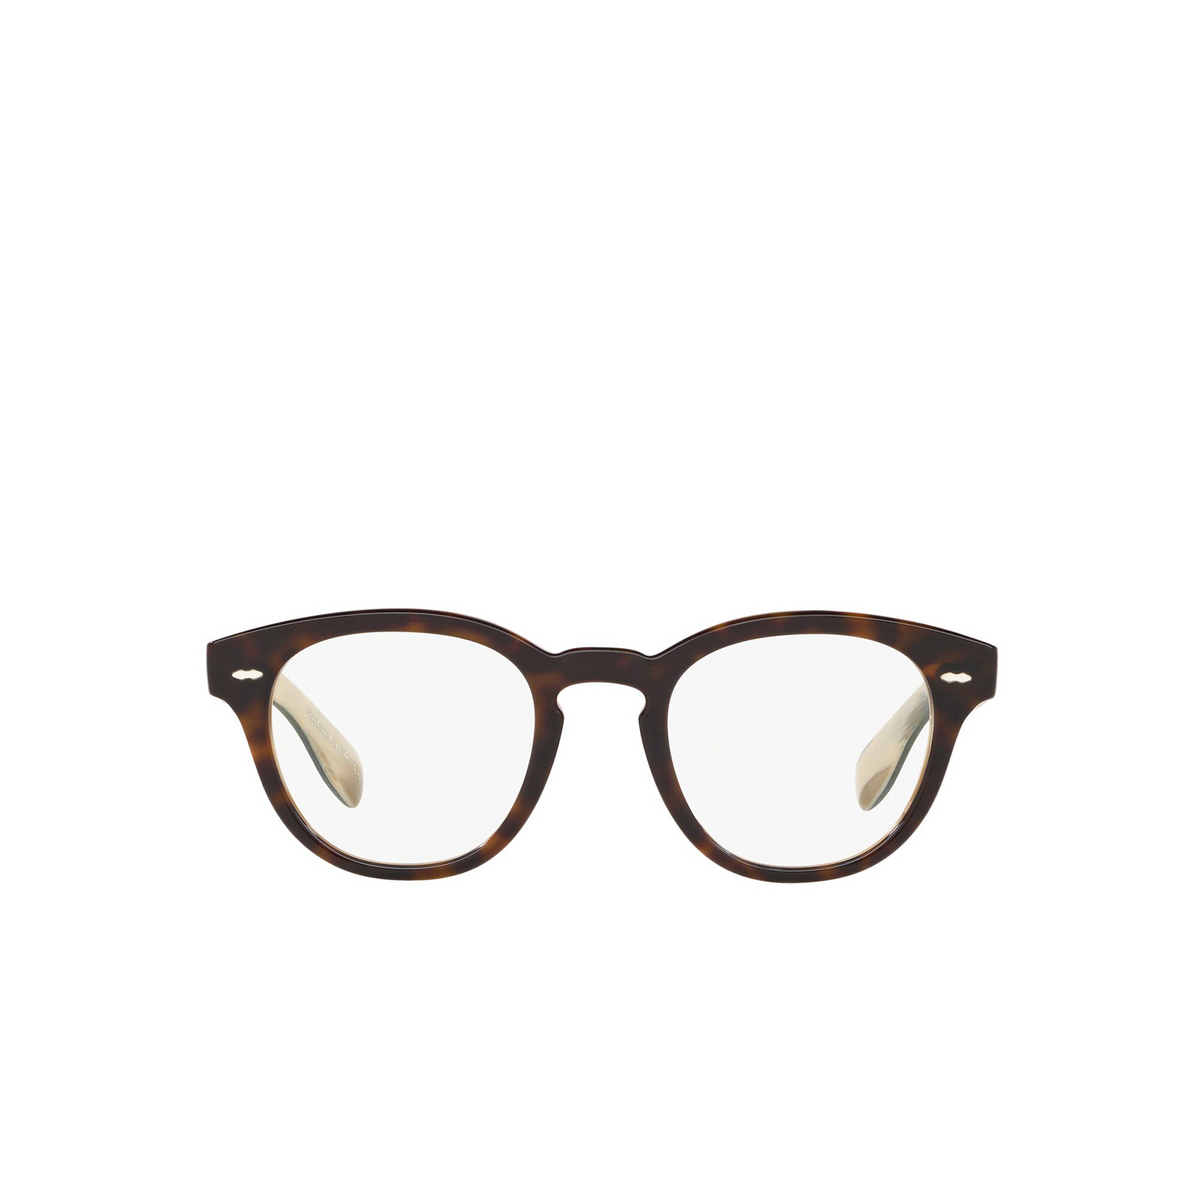 Occhiali da vista Oliver Peoples CARY GRANT 1666 362 / Horn - frontale